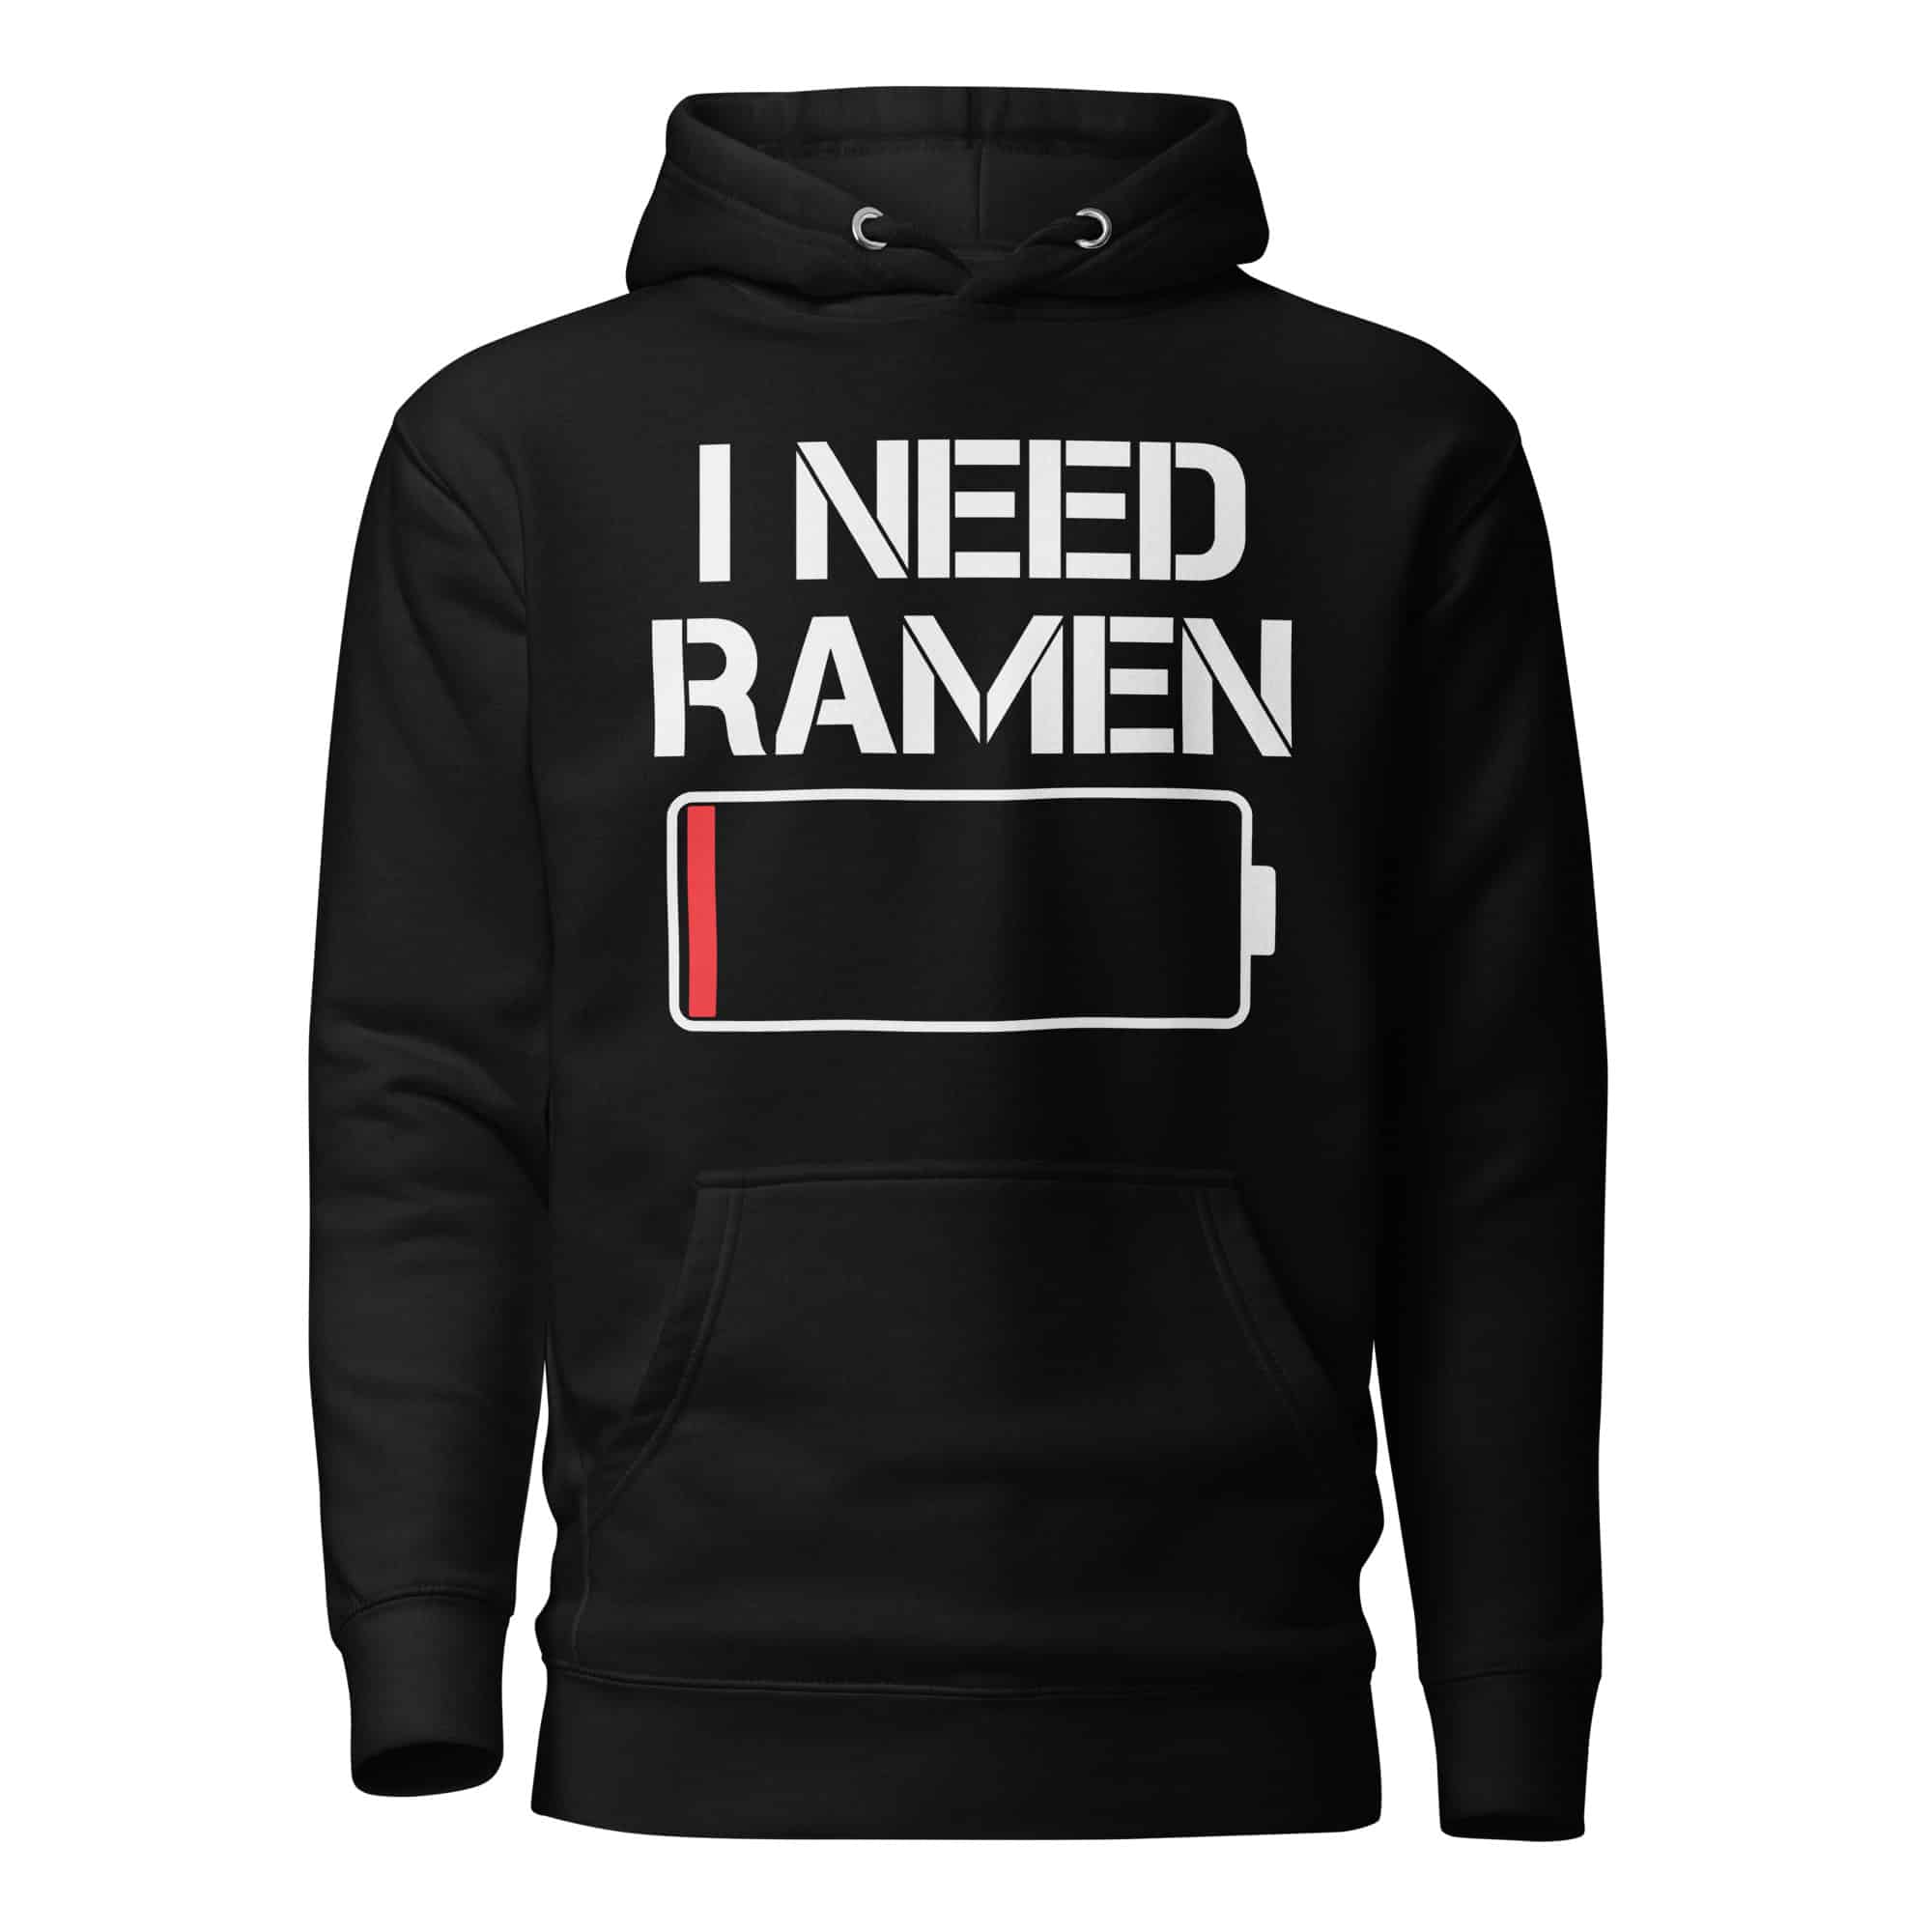 I Need Ramen Unisex Hoodie Video game store Gaming merchandise Gaming accessories shop Online gaming store Video game shop near me Gaming console store PC gaming store Gaming gear shop Retro gaming shop Board game shop Anime merchandise Anime store online Japanese anime shop Anime figurines Manga shop Anime DVDs Anime accessories Anime apparel Anime collectibles Anime gifts